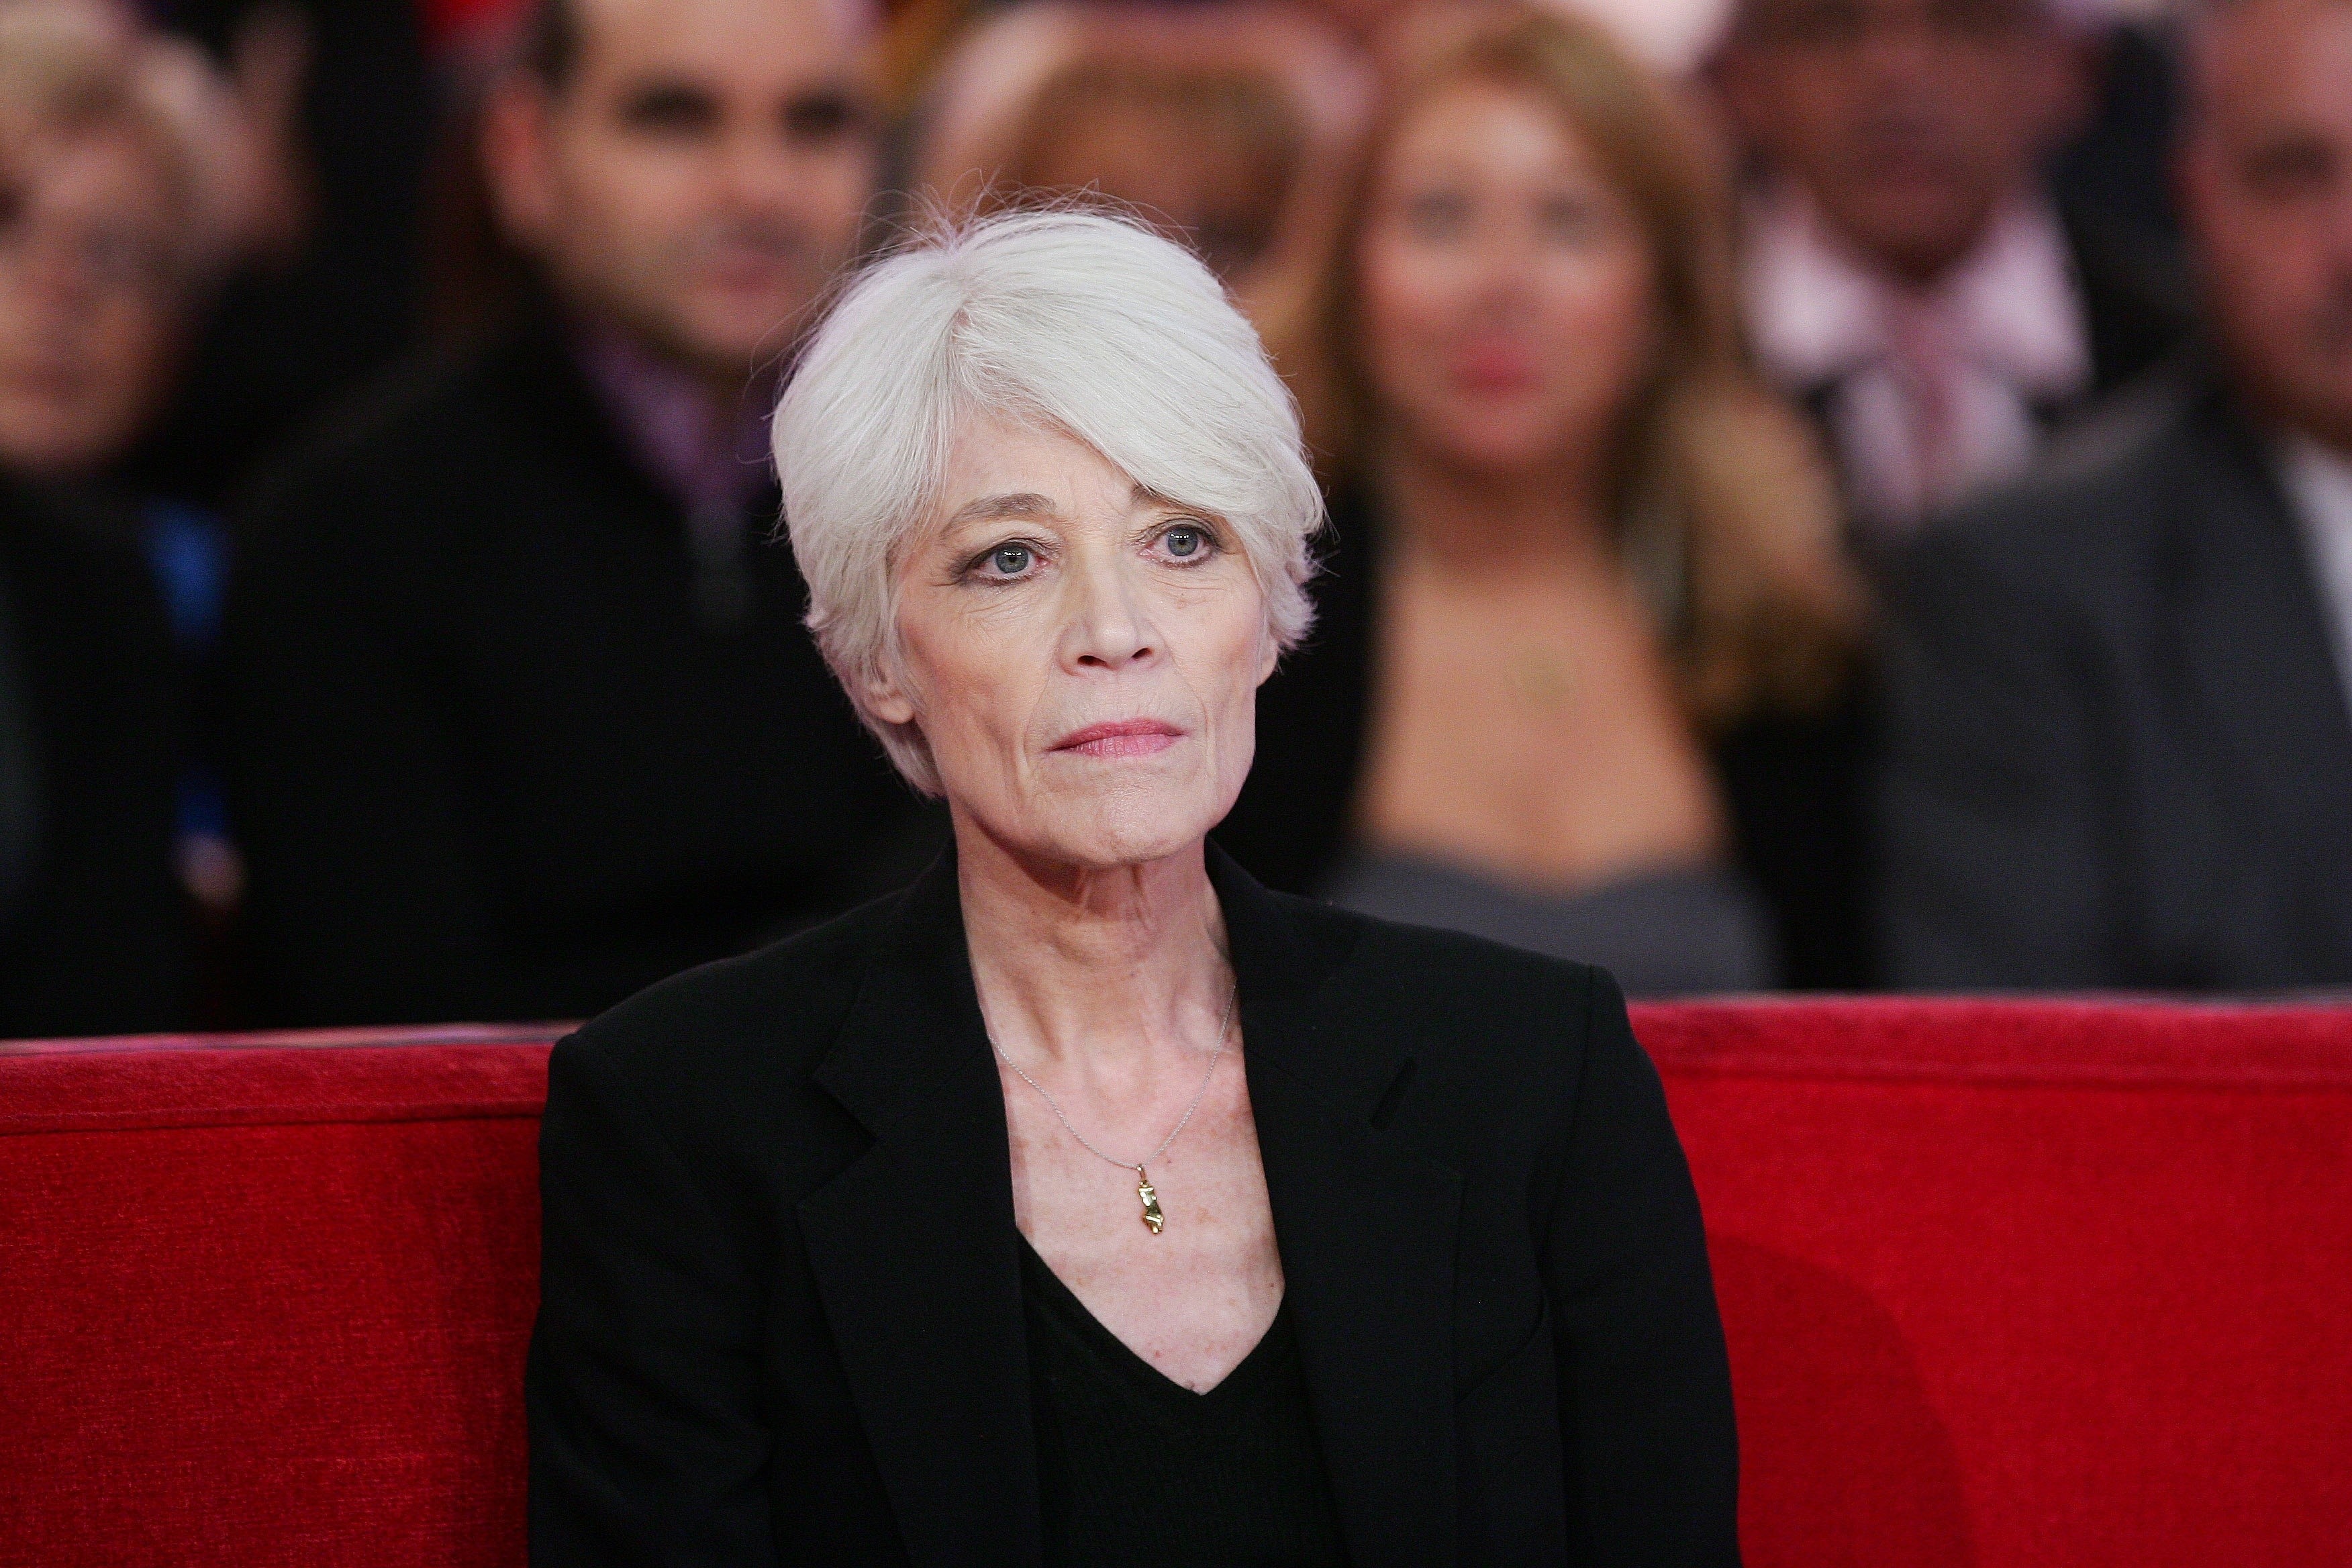 PARIS, FRANCE - OCTOBER 30: French singer Francoise Hardy attends 'Vivement Dimanche' TV show on October 30, 2012 in Paris, France. (Photo by Serge BENHAMOU/Gamma-Rapho via Getty Images) (Foto: Gamma-Rapho via Getty Images)